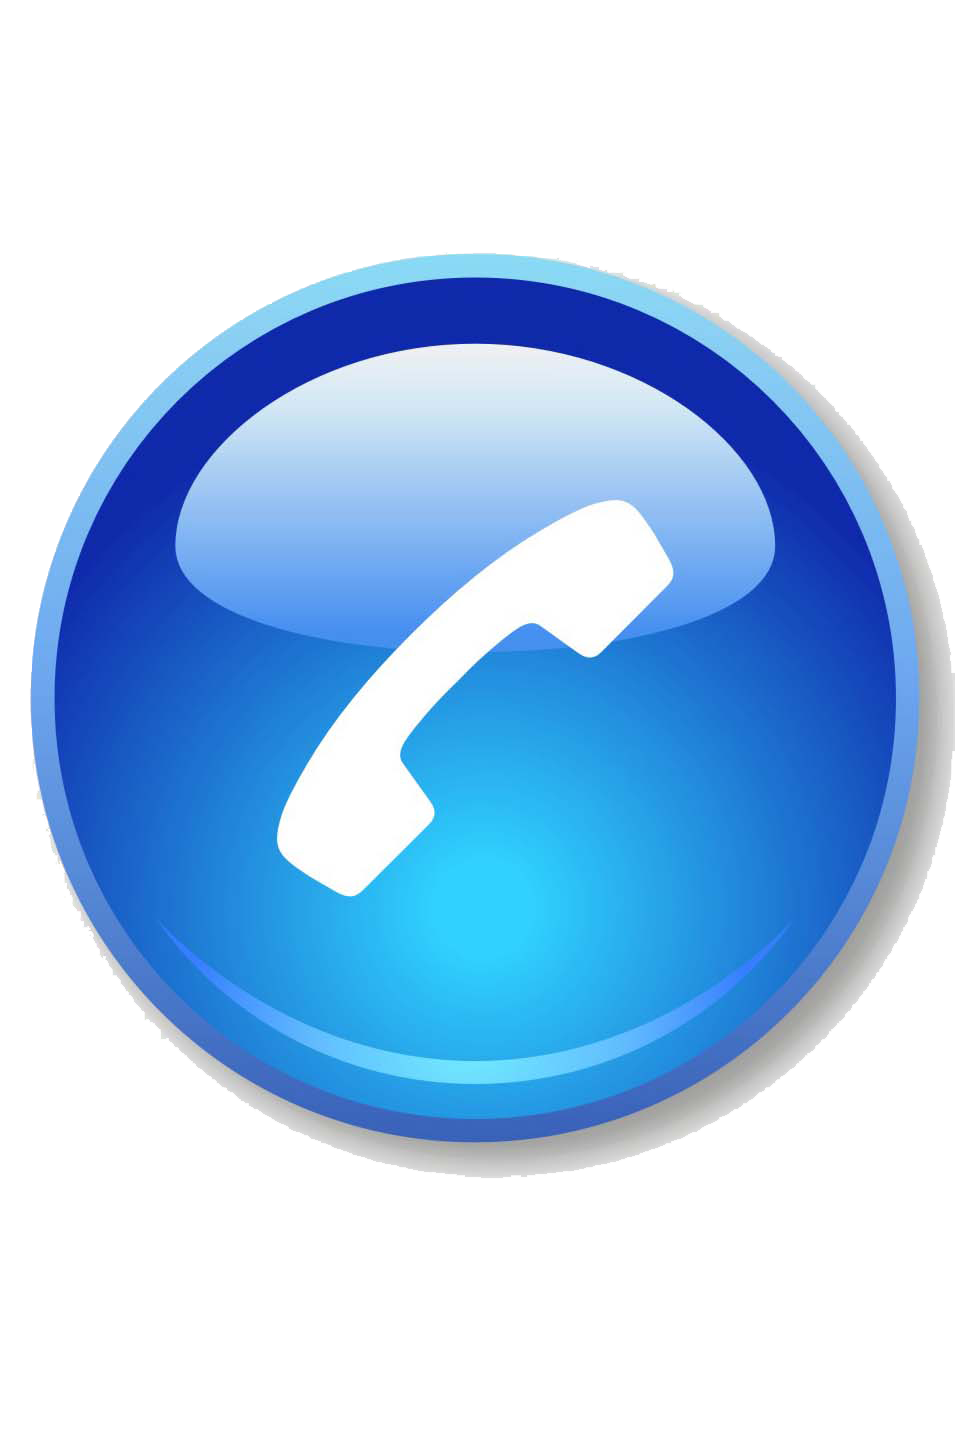 Telephone clipart blue. Skyfold phone png transparent